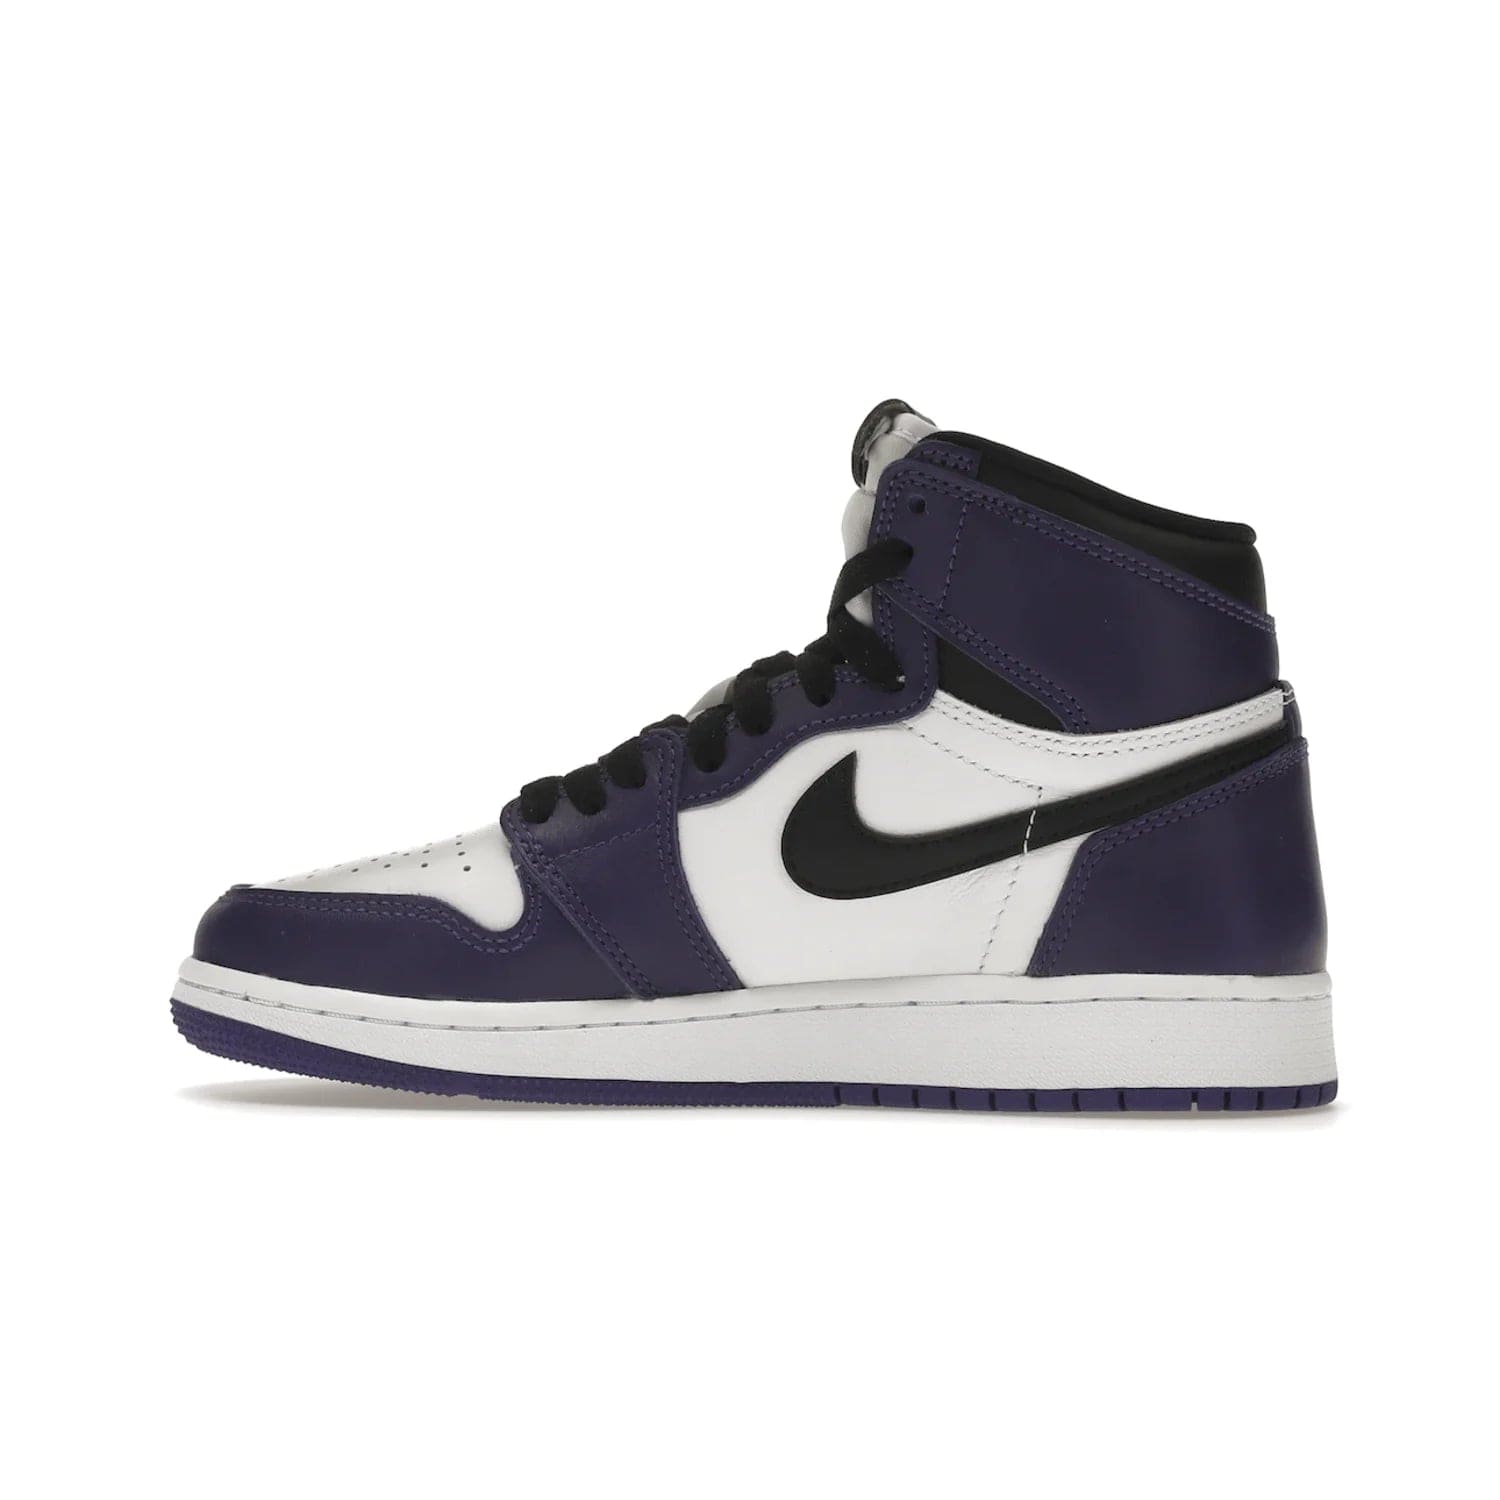 Jordan 1 Retro High Court Purple White (GS) - Image 20 - Only at www.BallersClubKickz.com - The Air Jordan 1 Retro High Court Purple is here and young sneaker heads can show off classic style. Features a white tumbled leather upper, black swoosh, purple overlays, black collar with purple overlay, white tongue, black patch with purple Nike Air logo and swoosh, white midsole, and purple rubber outsole with circular pattern.